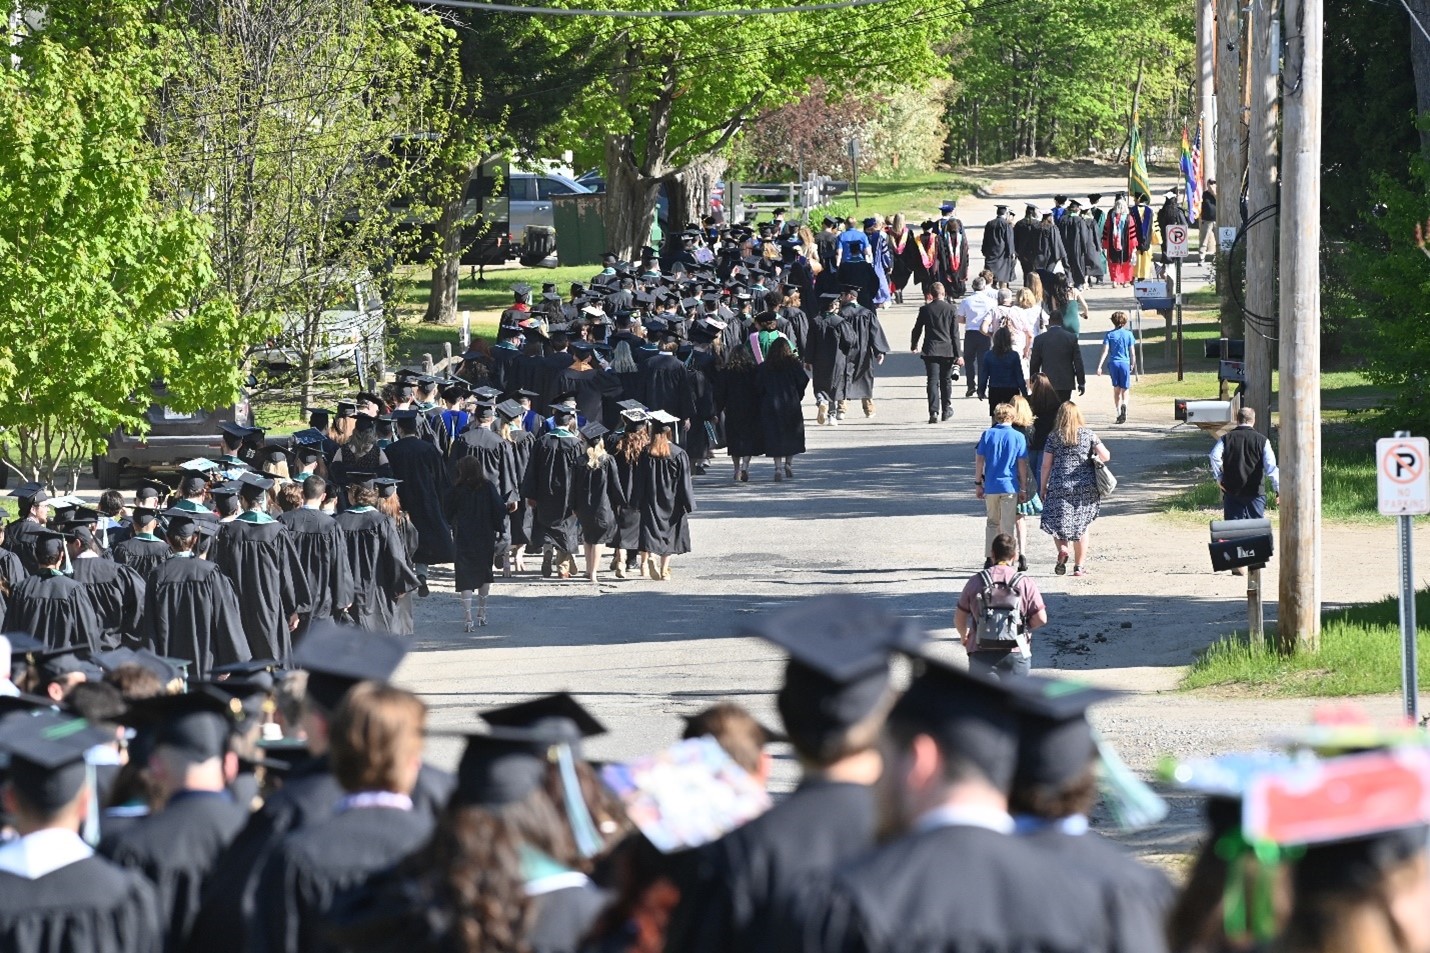 Students walking to commencement ceremony